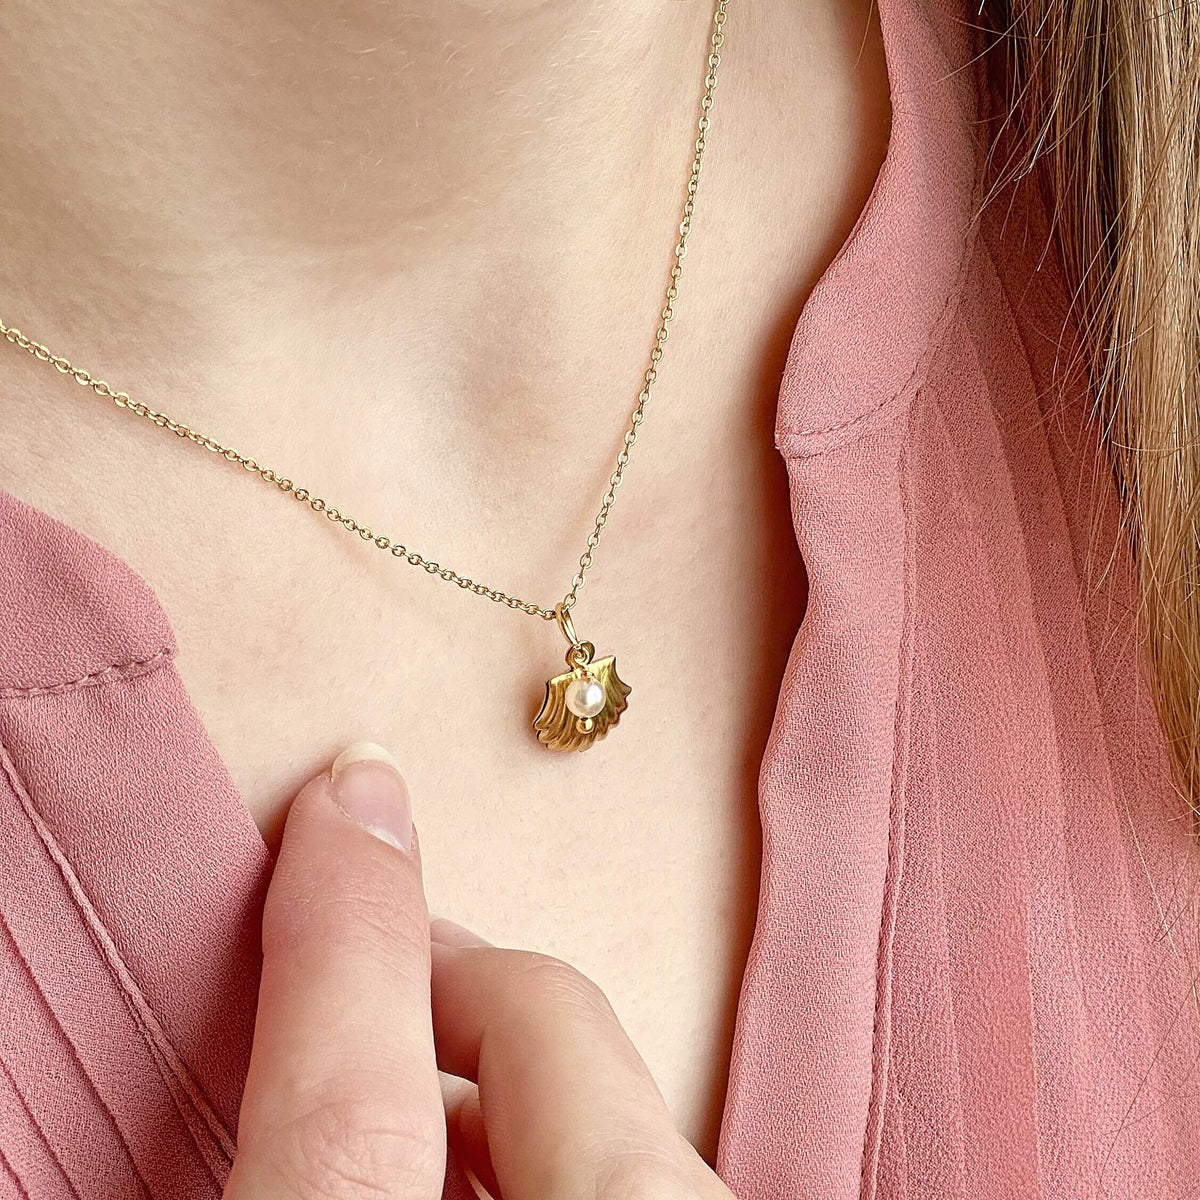 Image shows modela wearing a gold plated oyster shell necklace with pearl charm detail